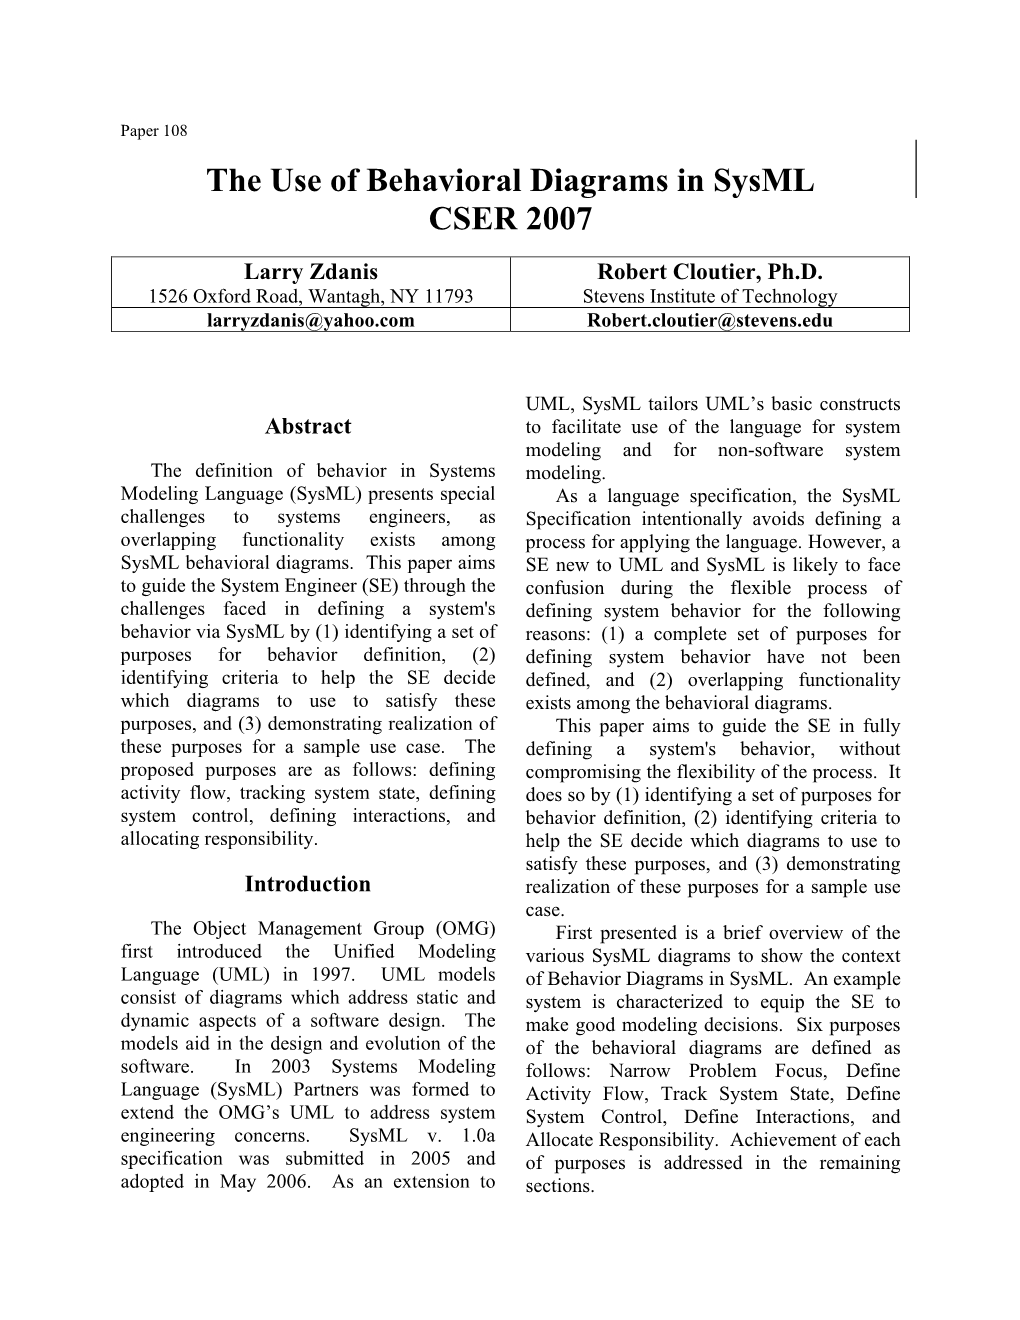 The Use of Behavioral Diagrams in Sysml CSER 2007